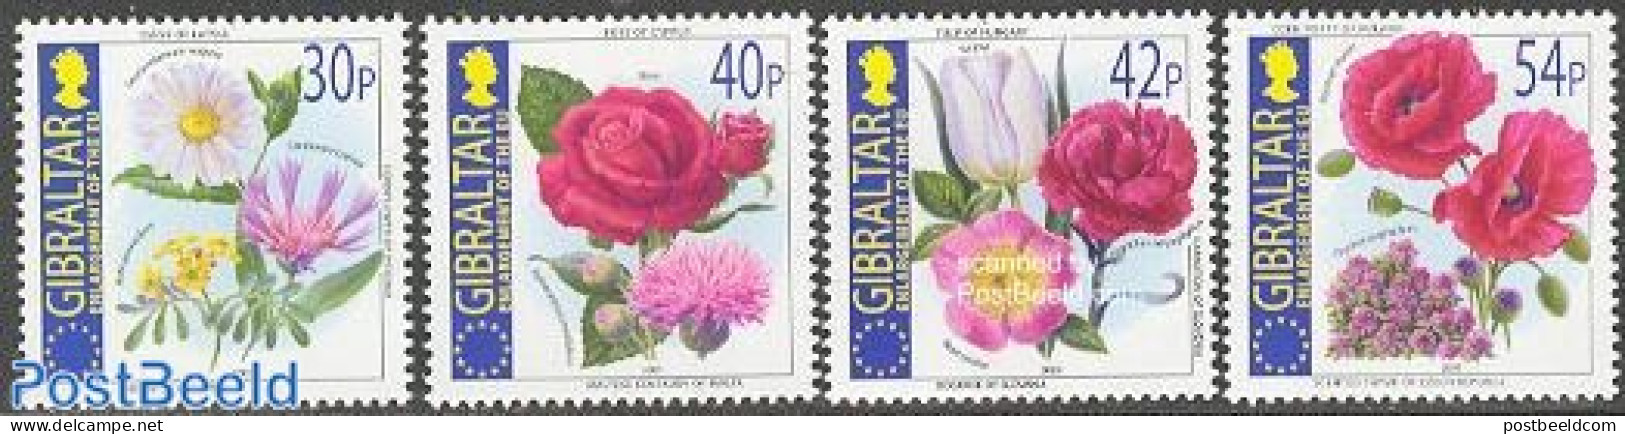 Gibraltar 2003 Enlargement Of The EU, Flowers 4v, Mint NH, History - Nature - Europa Hang-on Issues - Flowers & Plants.. - Europese Gedachte